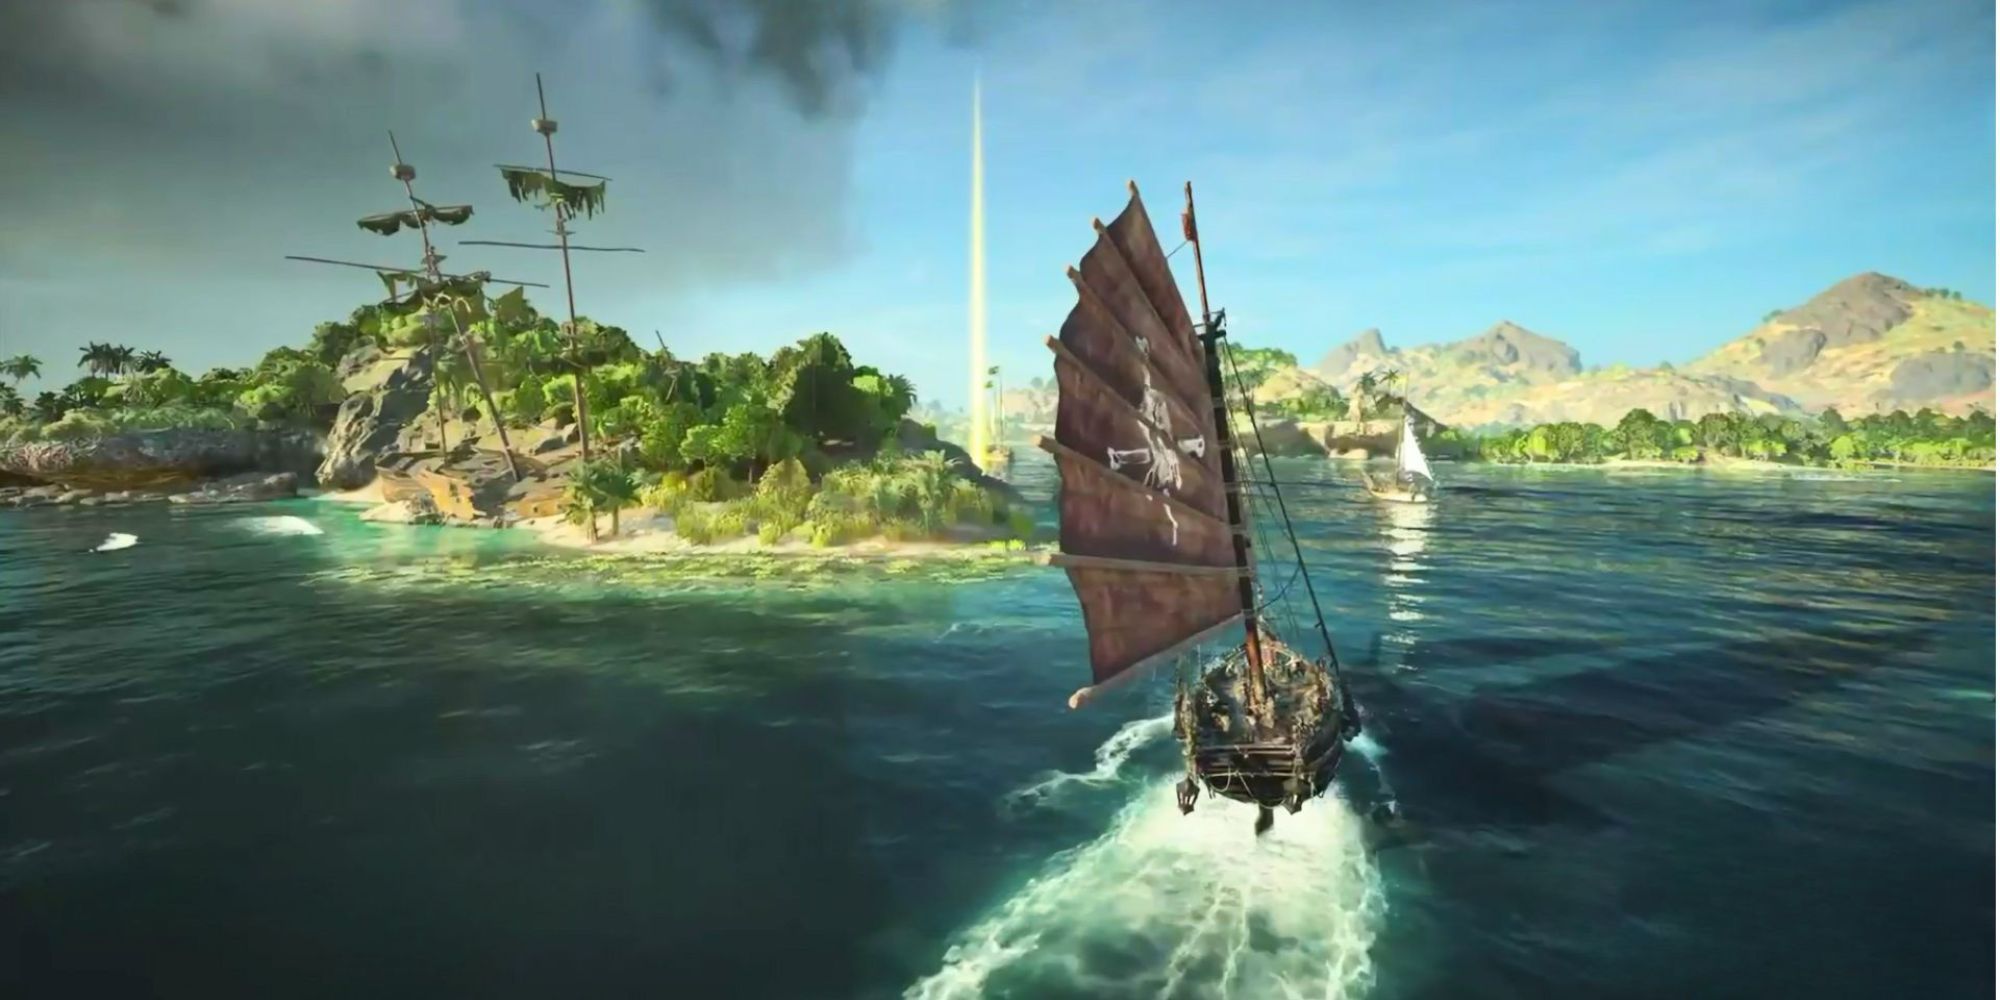 A player in Skull and Bones sailing their ship near an island with shipwrecks on it